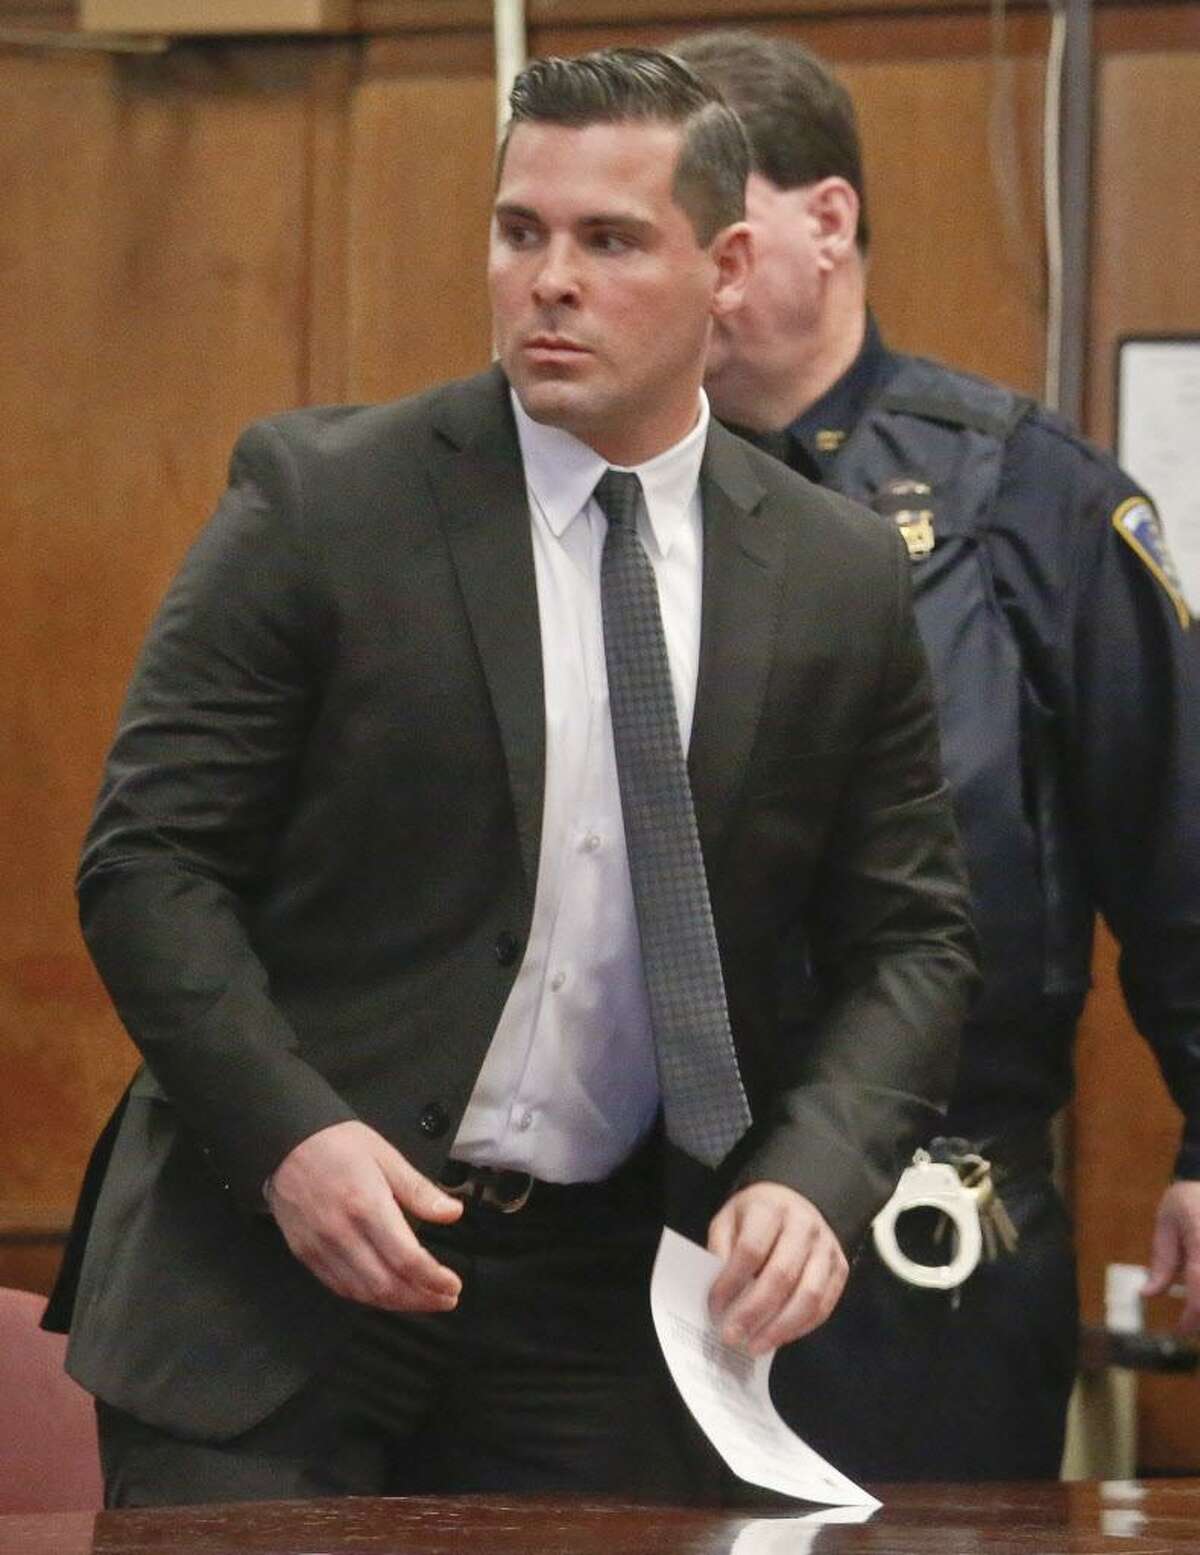 FILE — Lawrence Dilione, 28, of New Jersey, leaves after his hearing in criminal court, Tuesday Dec. 13, 2016, in New York. Dilione is charged along with James Rackover, who was charged with concealment of a human body, hindering prosecution and tampering with evidence in the stabbing death of 26-year-old Joseph Comunale from Connecticut. (AP Photo/Bebeto Matthews)